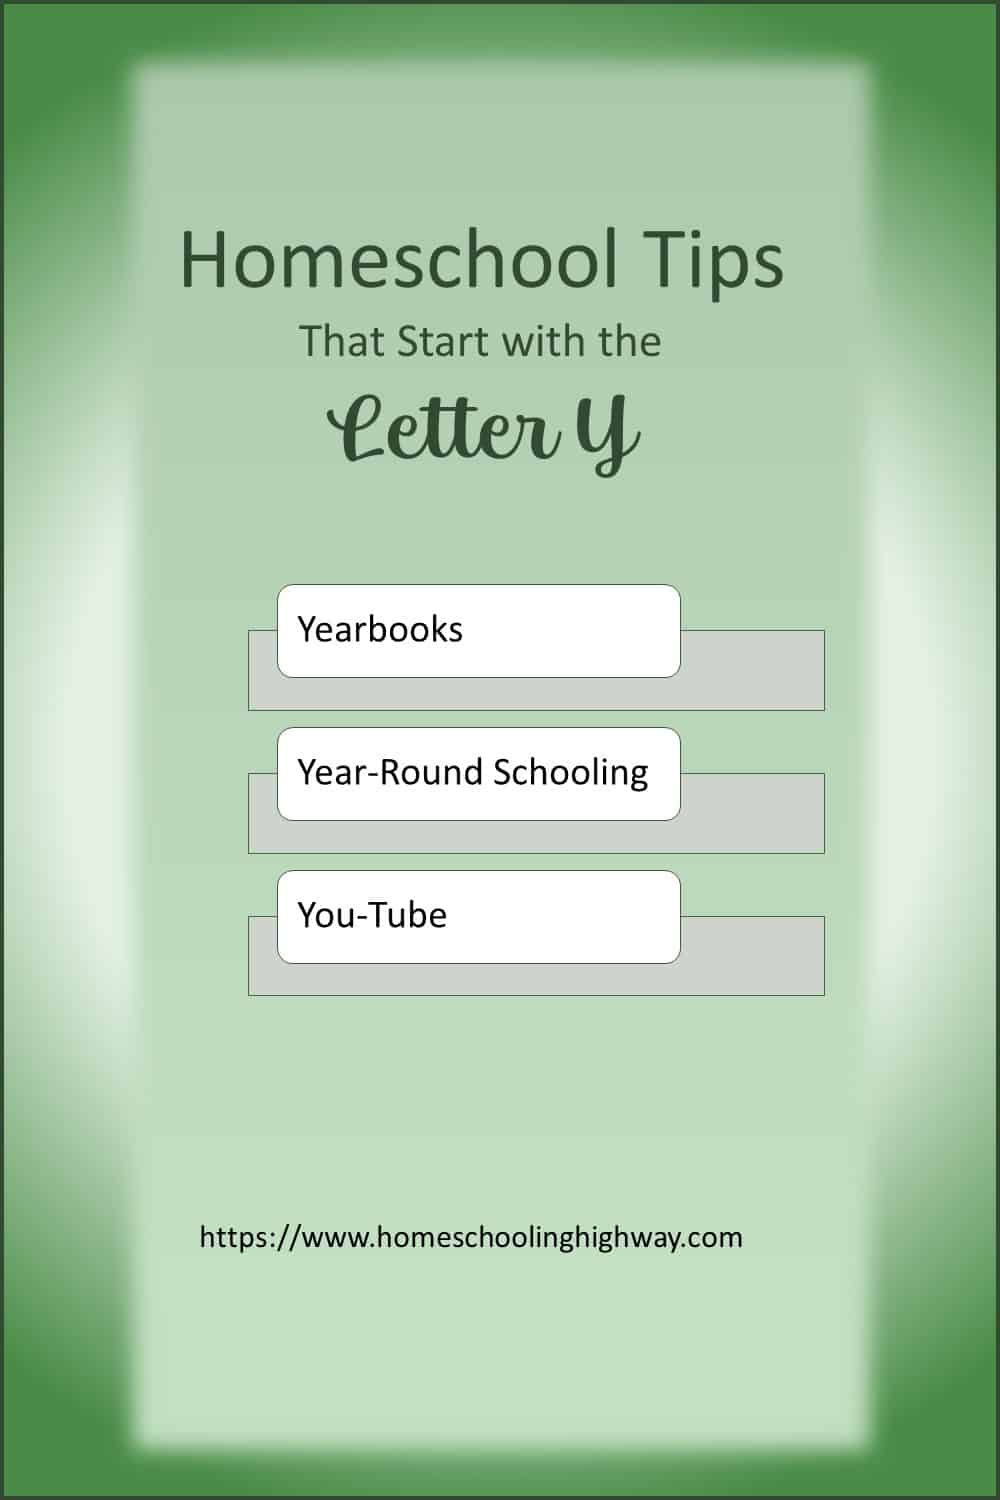 Homeschooling Tips That Start With Y. Yearbooks, Year-Round Schooling, You-Tube